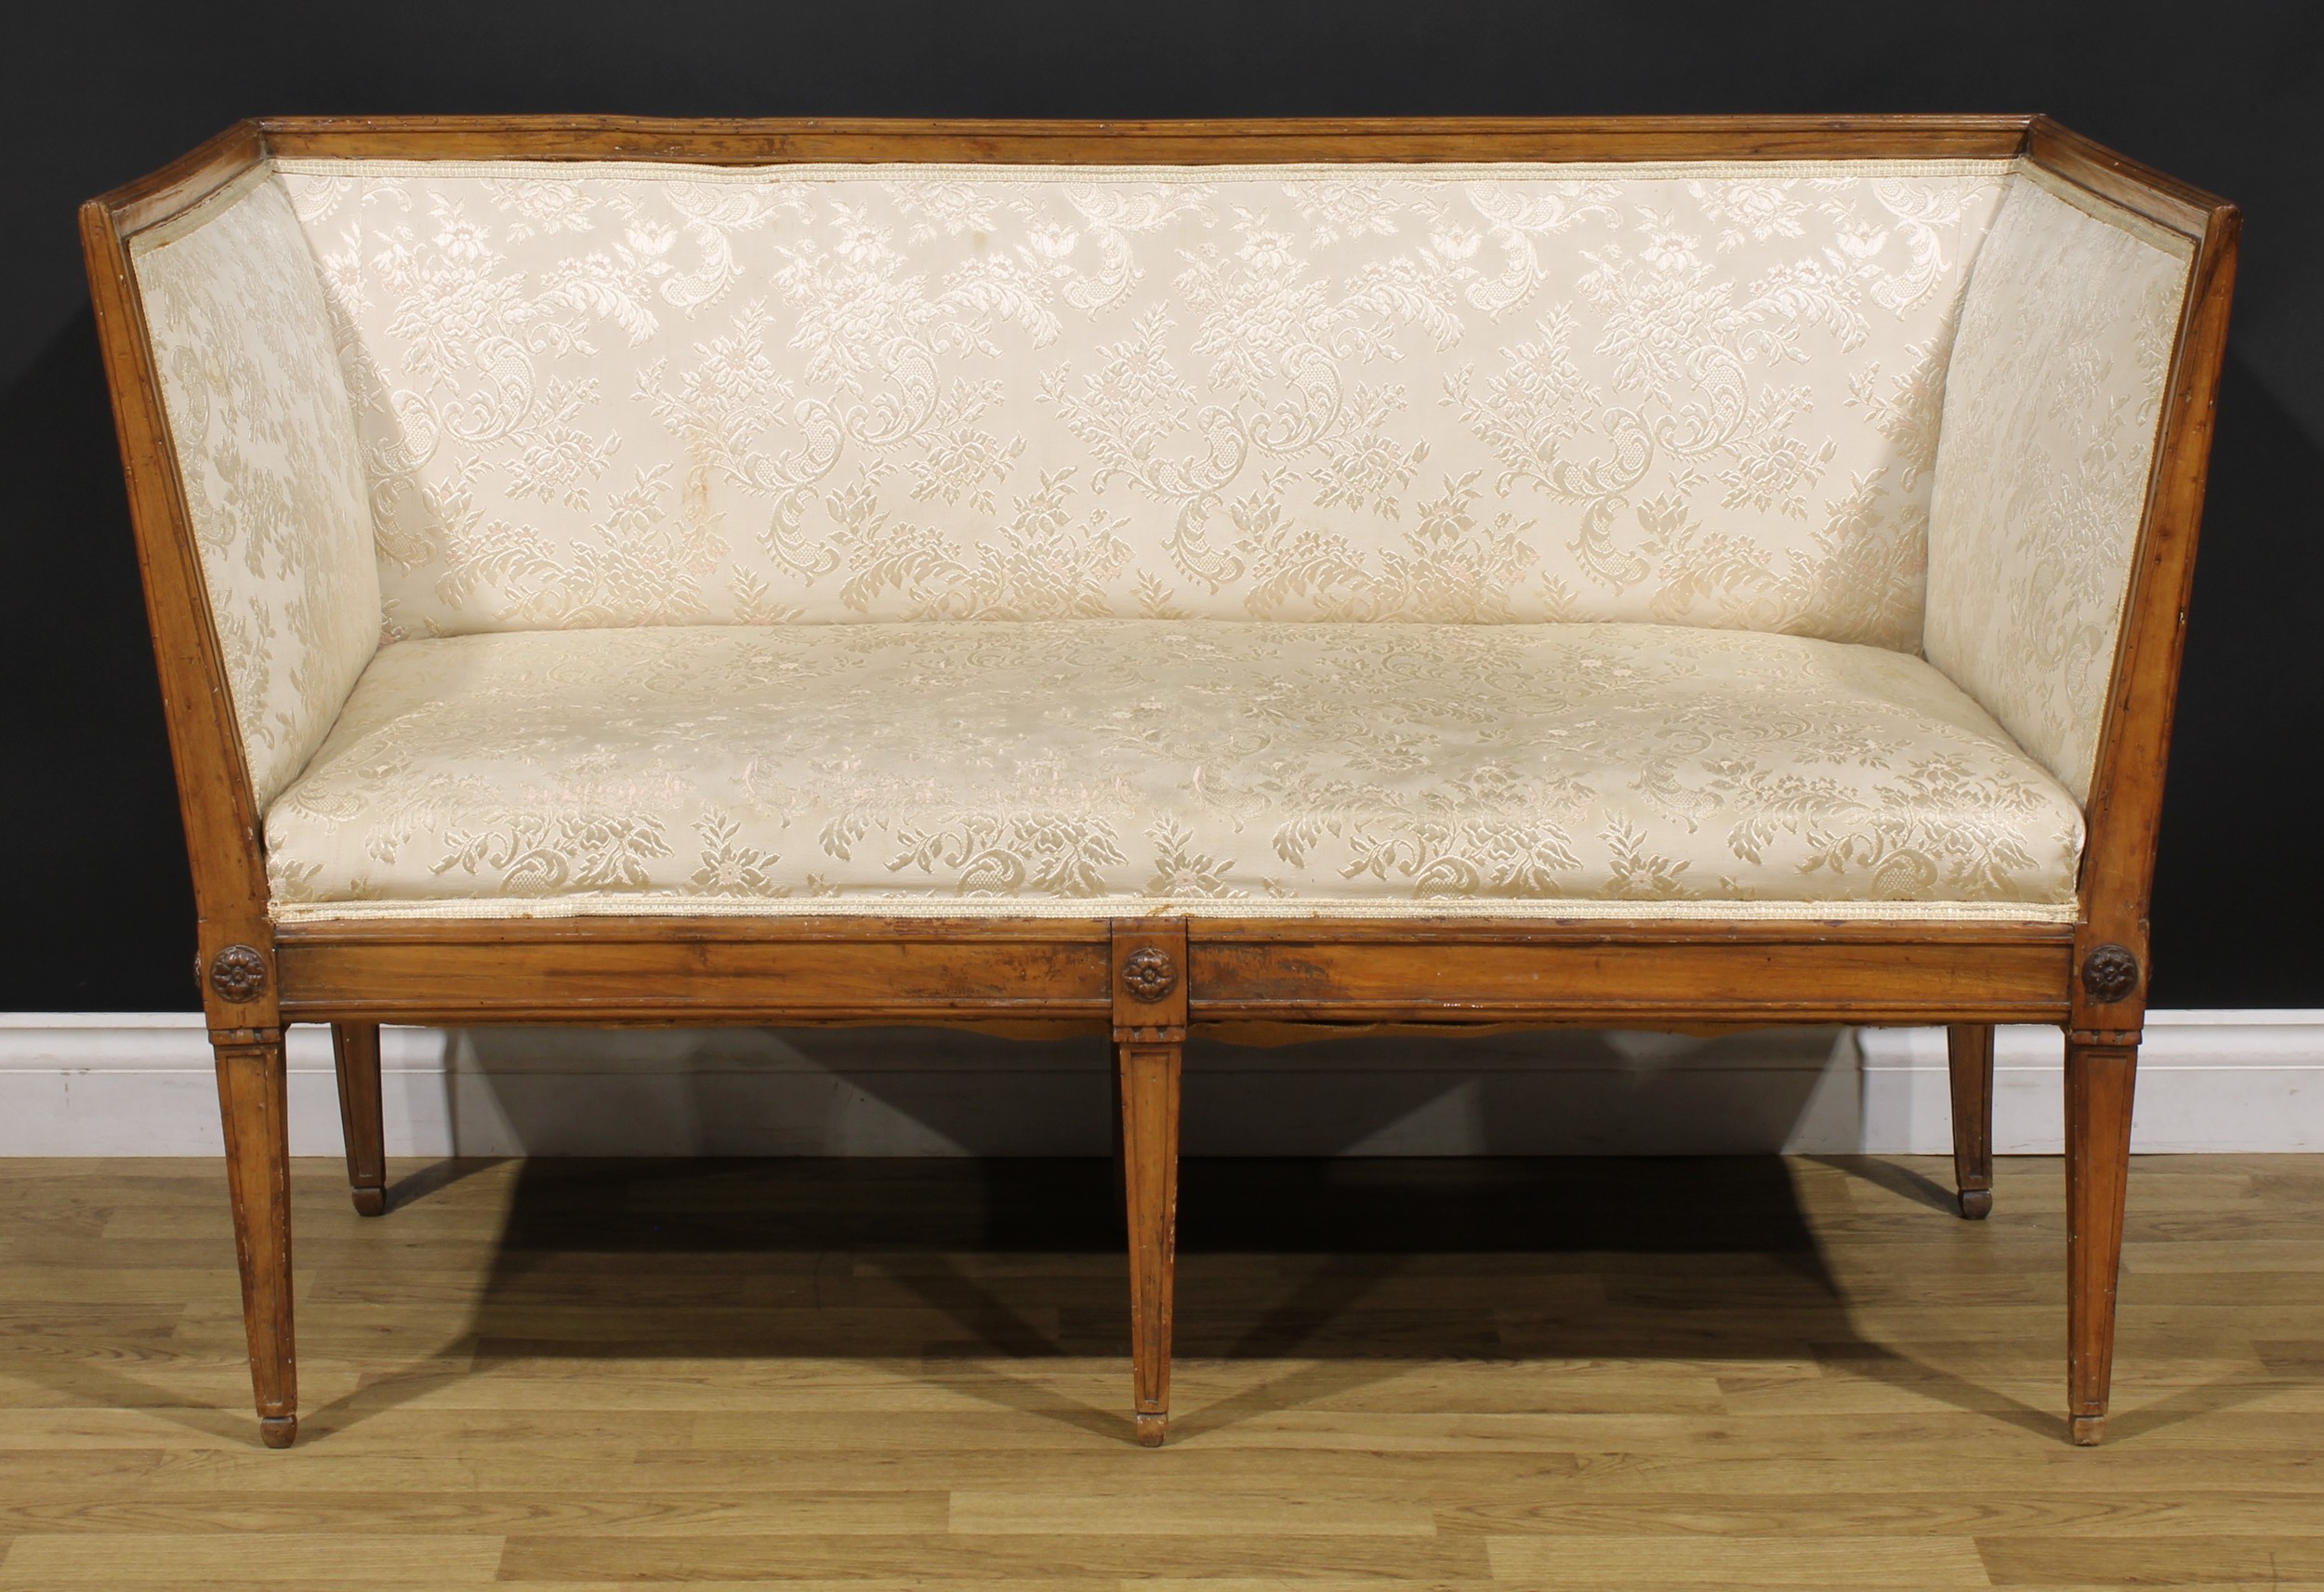 A late 19th/early 20th century Neoclassical Revival sofa, 88.5cm high, 147.5cm wide, the seat